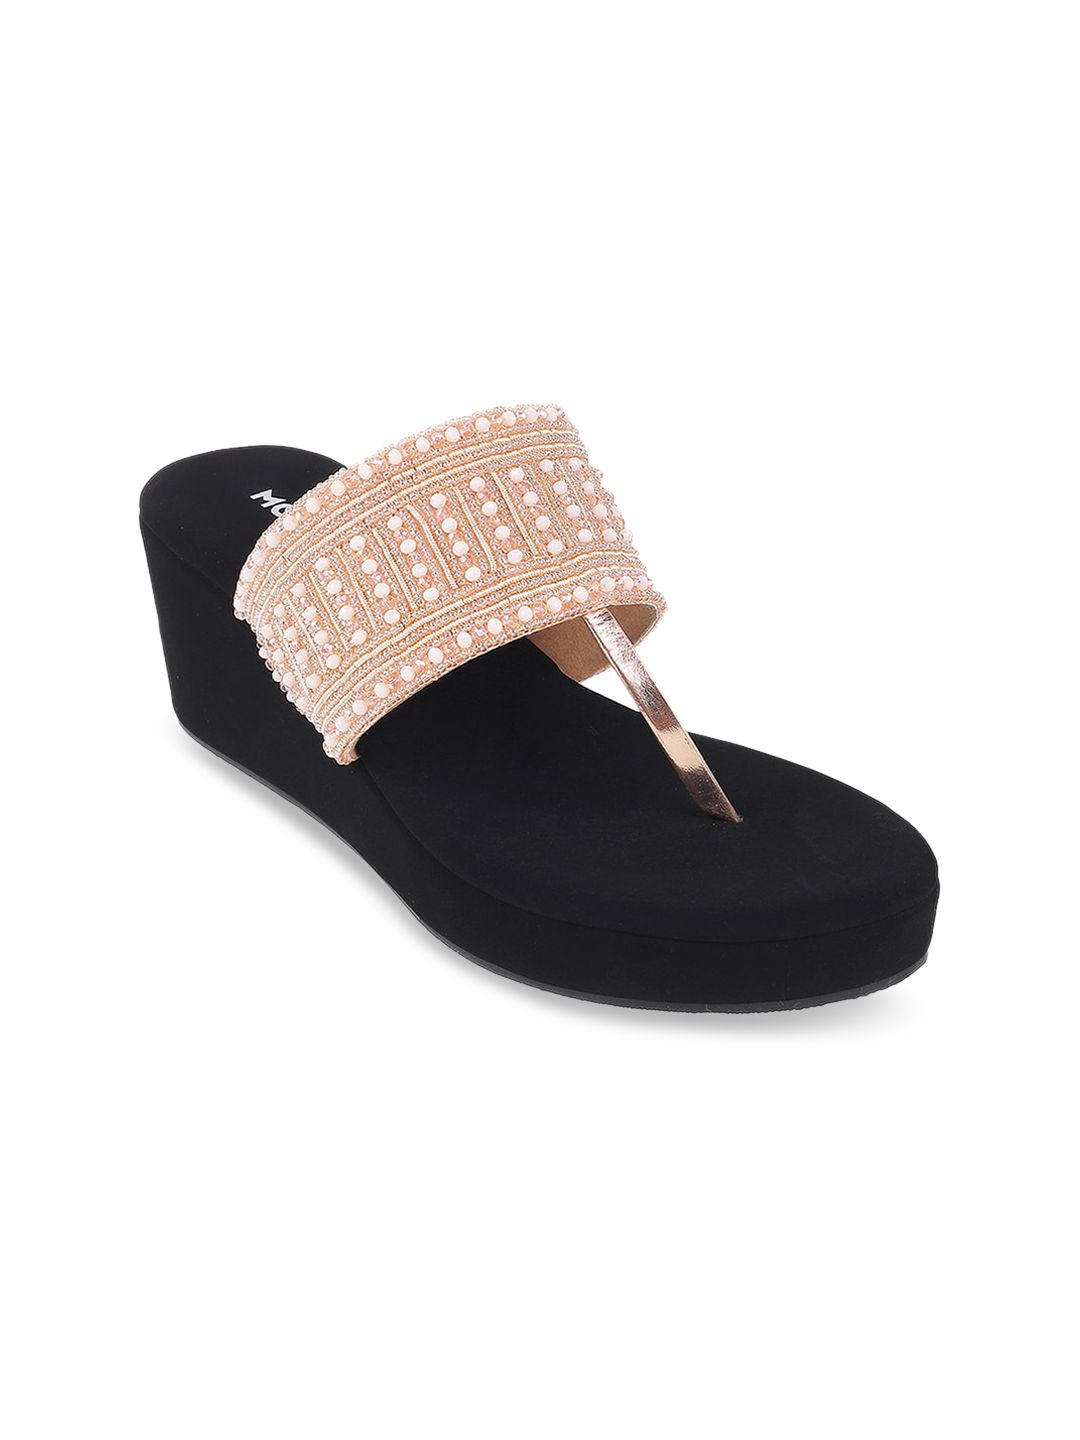 Mochi Peach-Coloured Open Toe Wedge Sandals Price in India